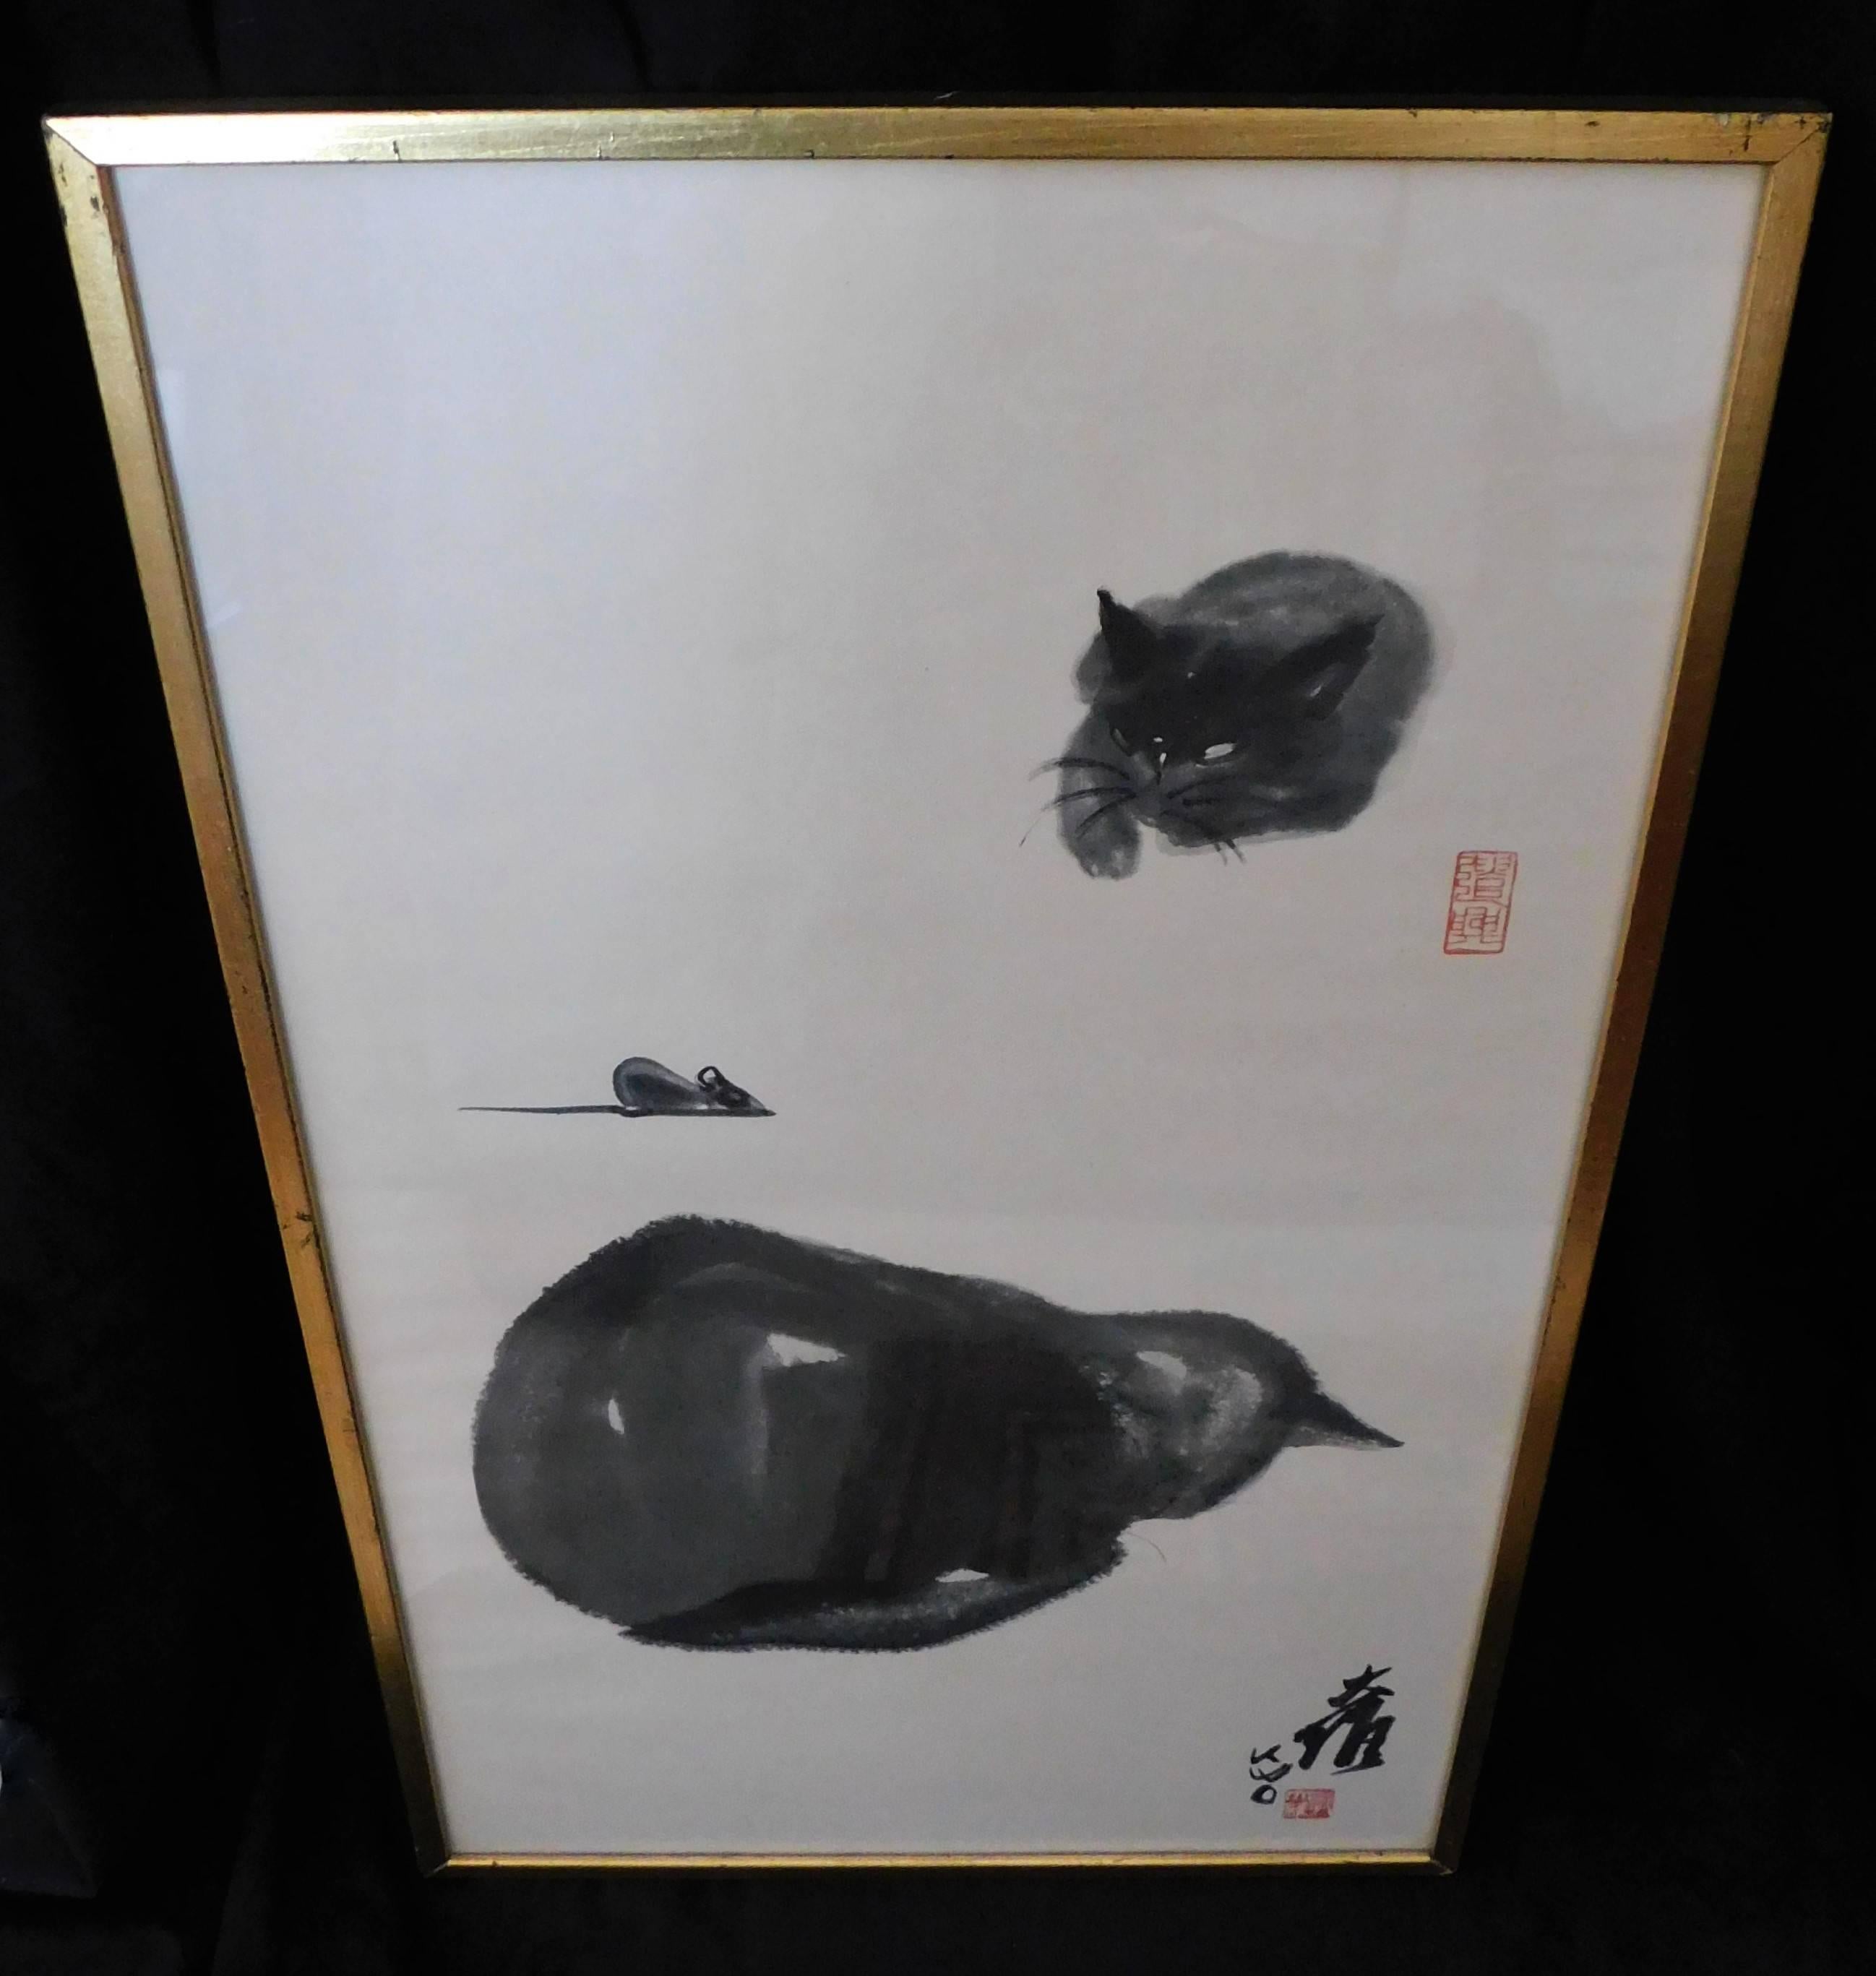 Artist and teacher Dr. David Kwo Da-Wei (1919-2003) became renowned for his Chinese brush paintings of his black cat, Kim. He also pioneered in using complete strokes to create impressionistic images. This limited edition lithograph is stamped in